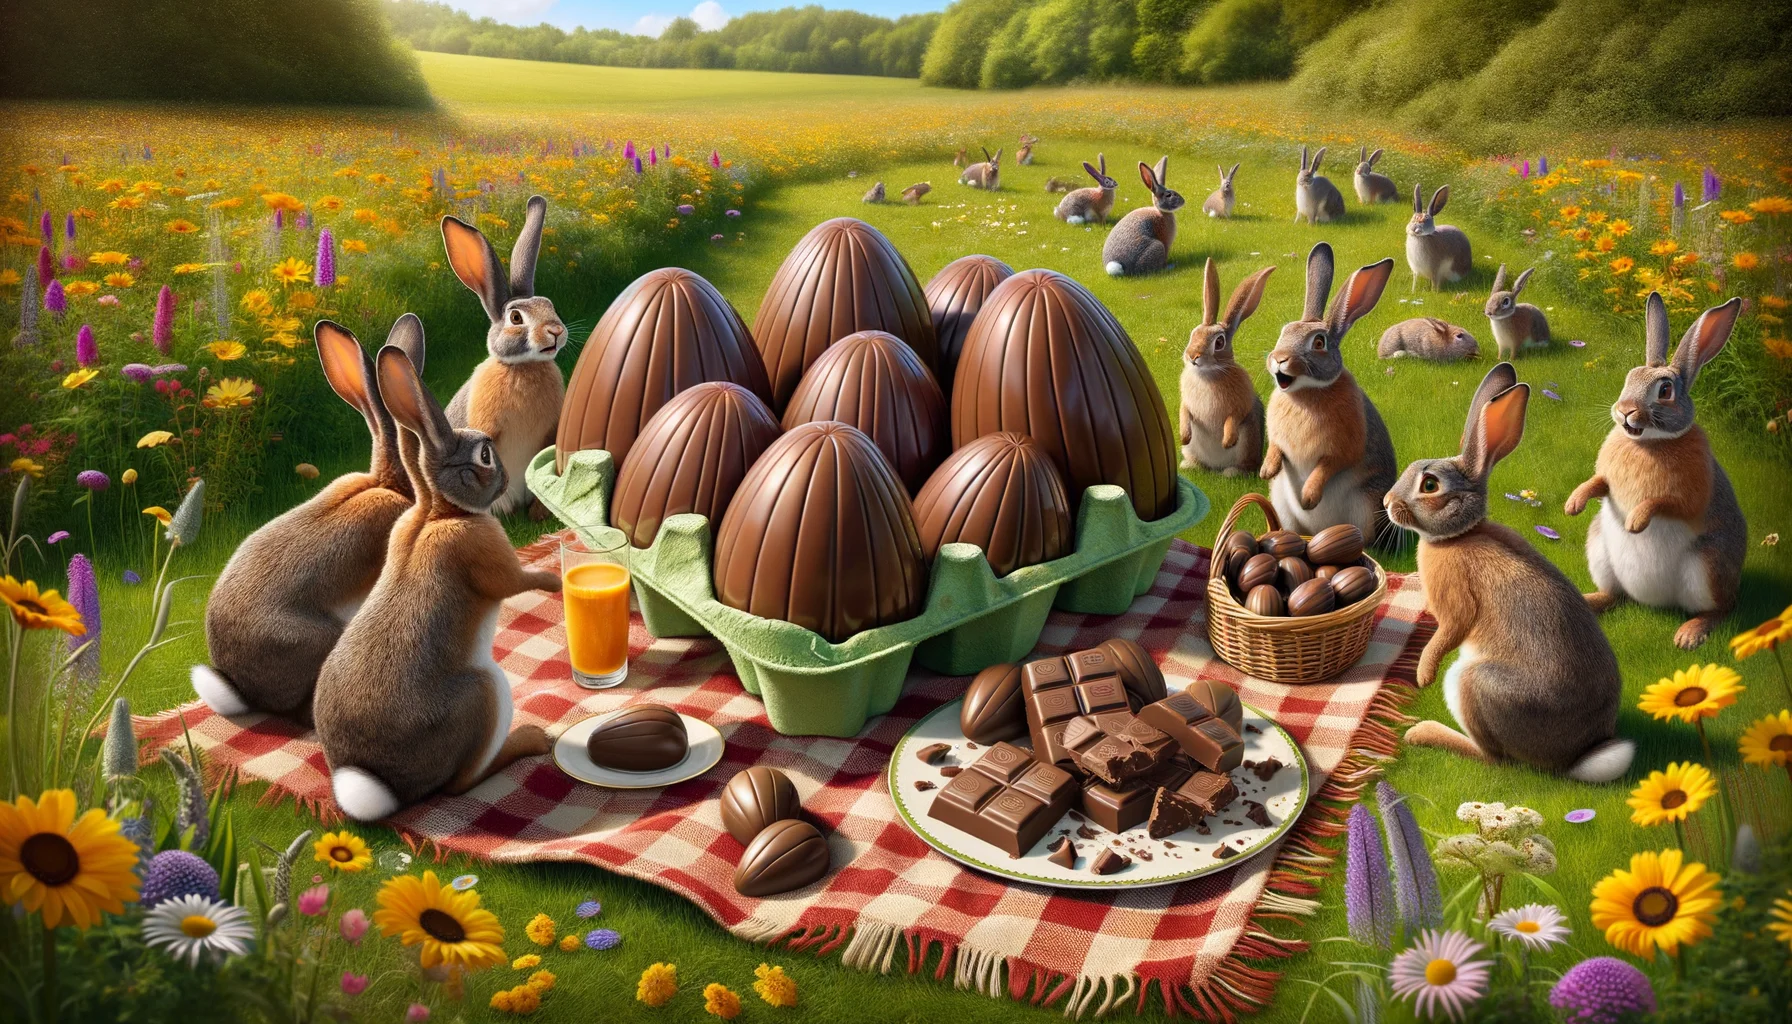 Imagine a humorous and highly detailed scene showcasing 'Easter Egg Shaped Vegan Chocolates'. These chocolates sit beautifully on a carefully arranged picnic blanket, set up in a sunny meadow abundant with wildflowers. Around the blanket, several rabbits excitedly gather, apparently confused about these strange 'eggs'. One of the rabbits is depicted attempting to communicate with the chocolates, assuming them to be fellow rabbits due to their egg shapes. The irony of the situation brings about a light-hearted and funny vibe. The chocolates themselves display a rich, deep brown color, and their egg-like forms are realistically rendered to enhance the amusing confusion.